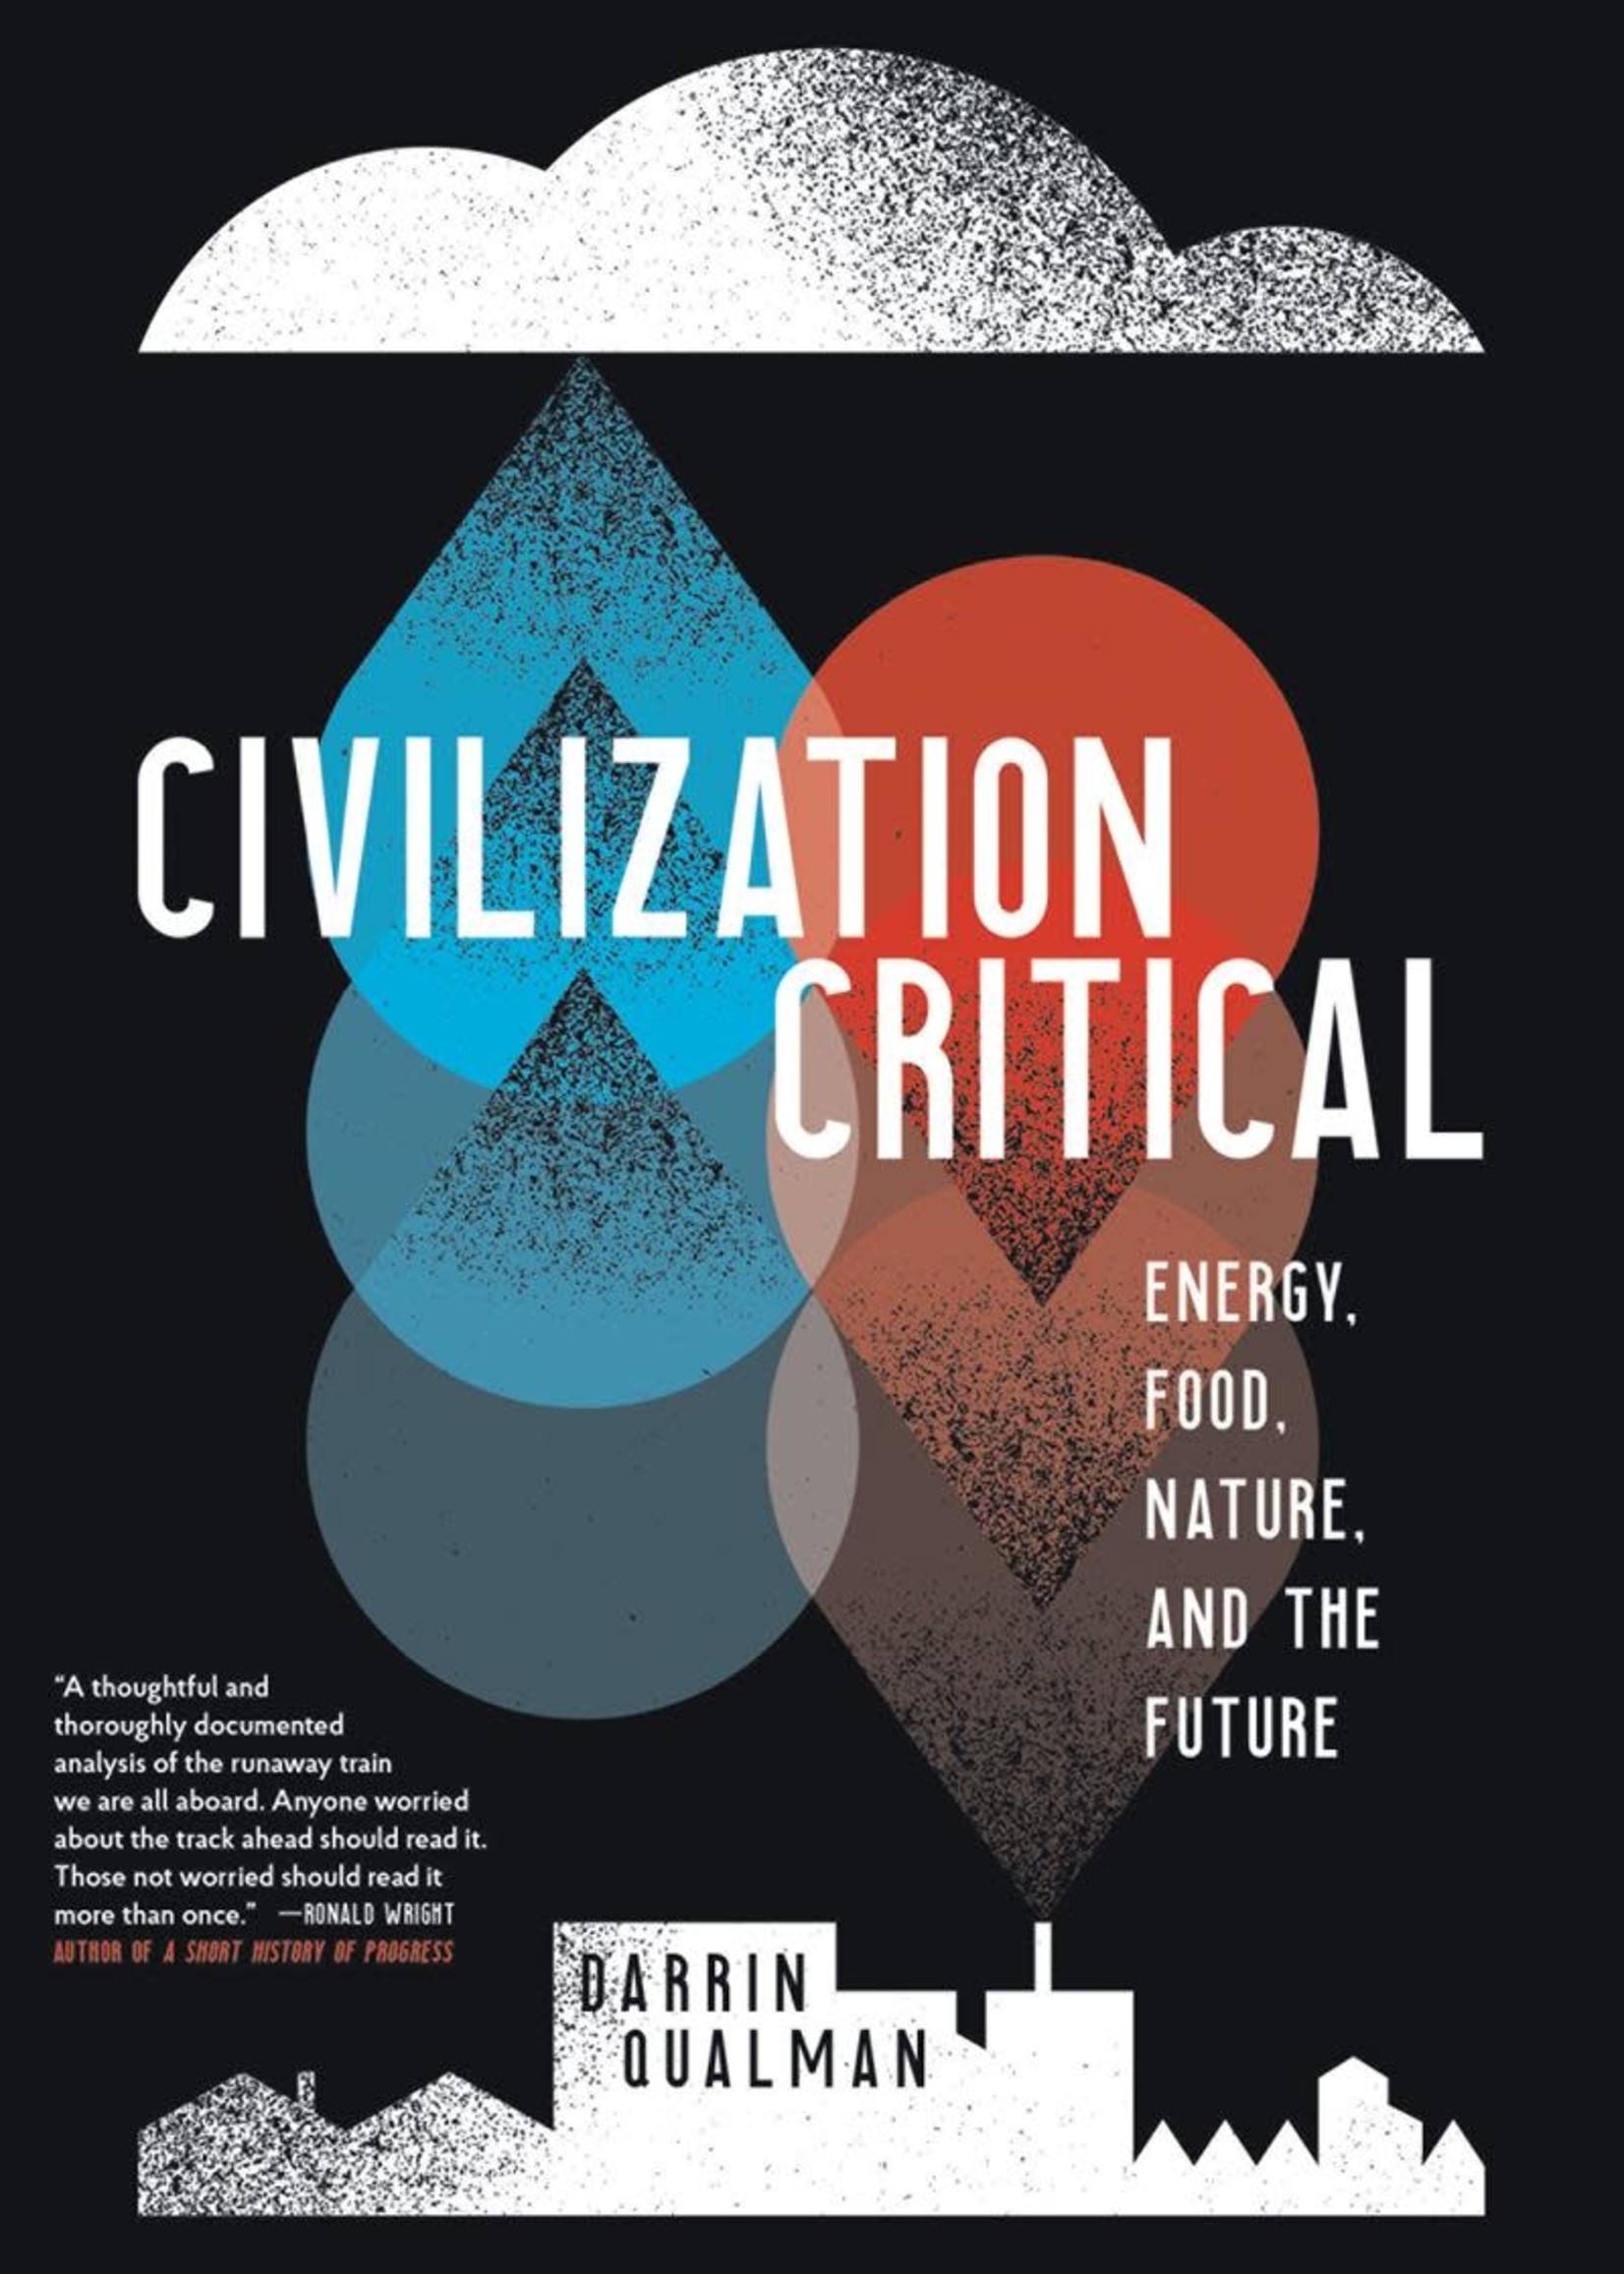 Civilization Critical: Energy, Food, Nature, and the Future by Darrin Qualman